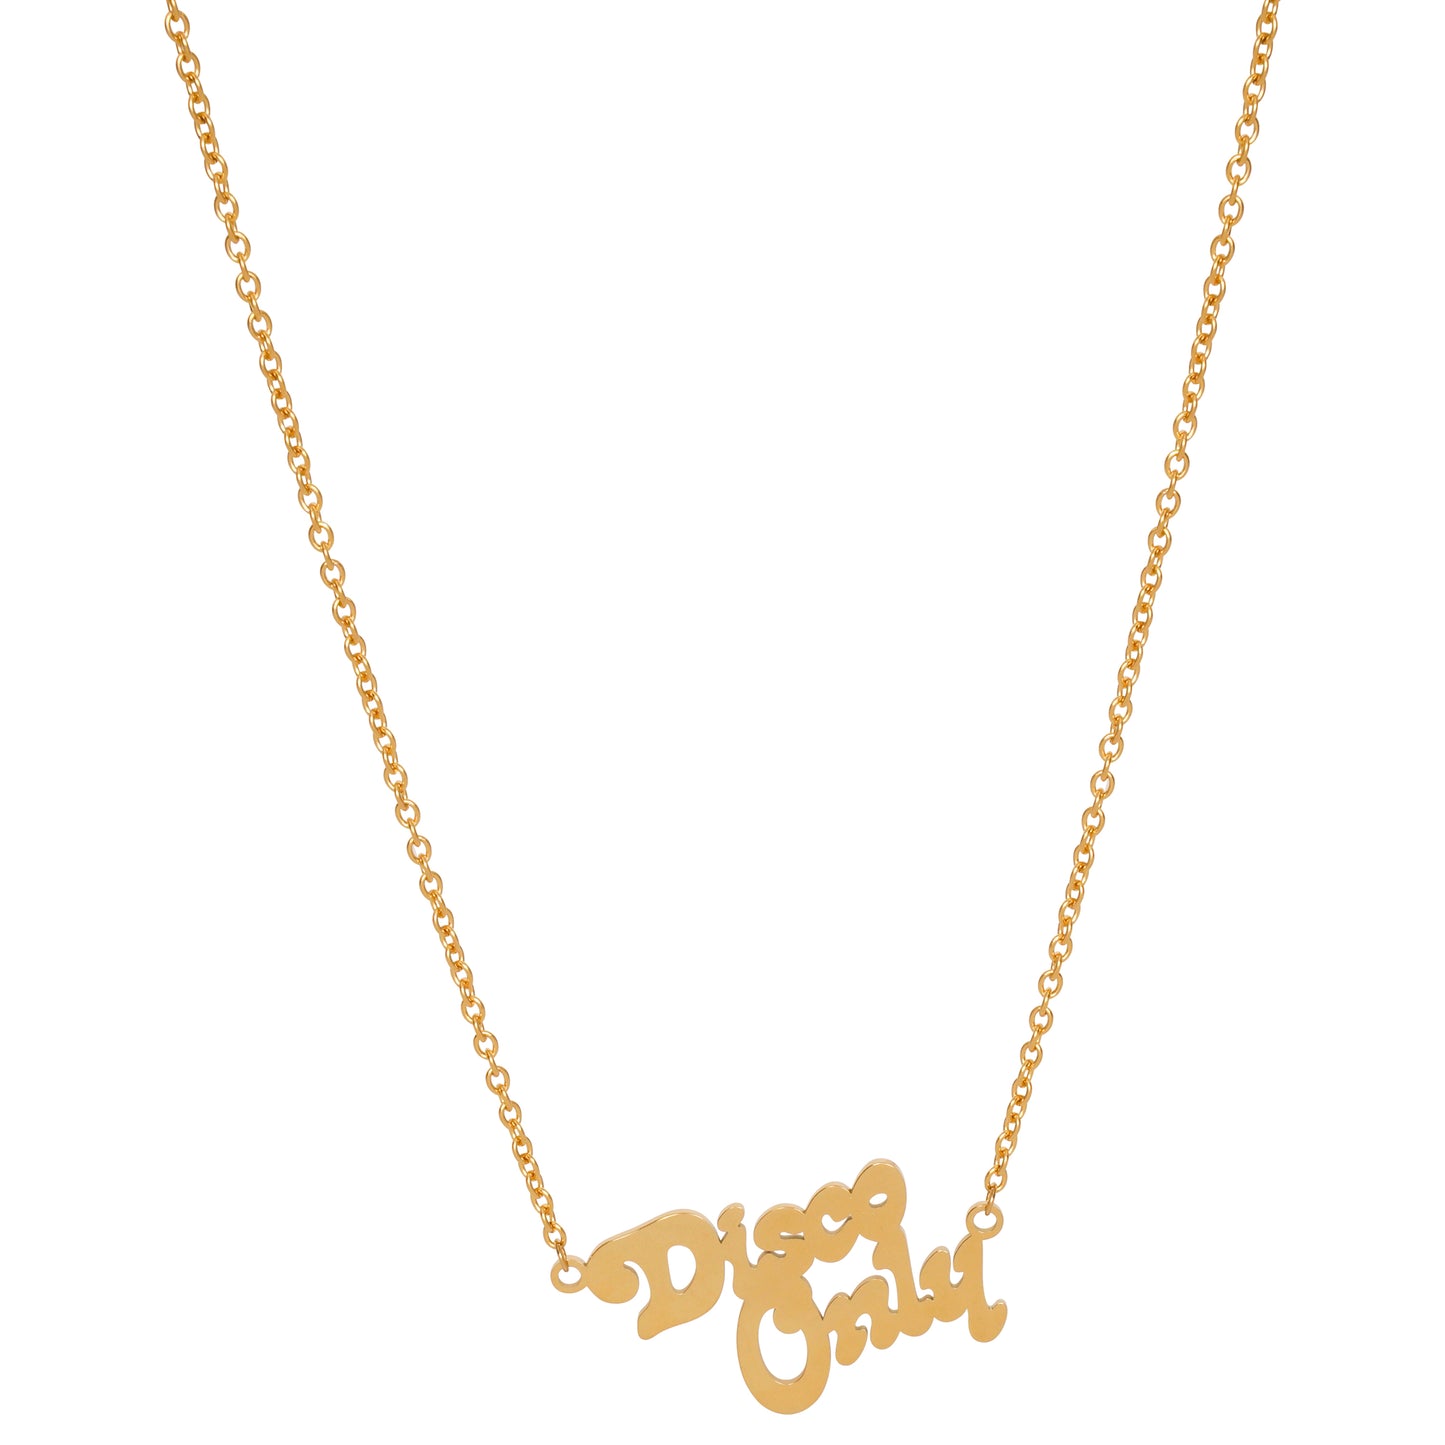 DISCO ONLY Pendant Necklace - Gold / Silver